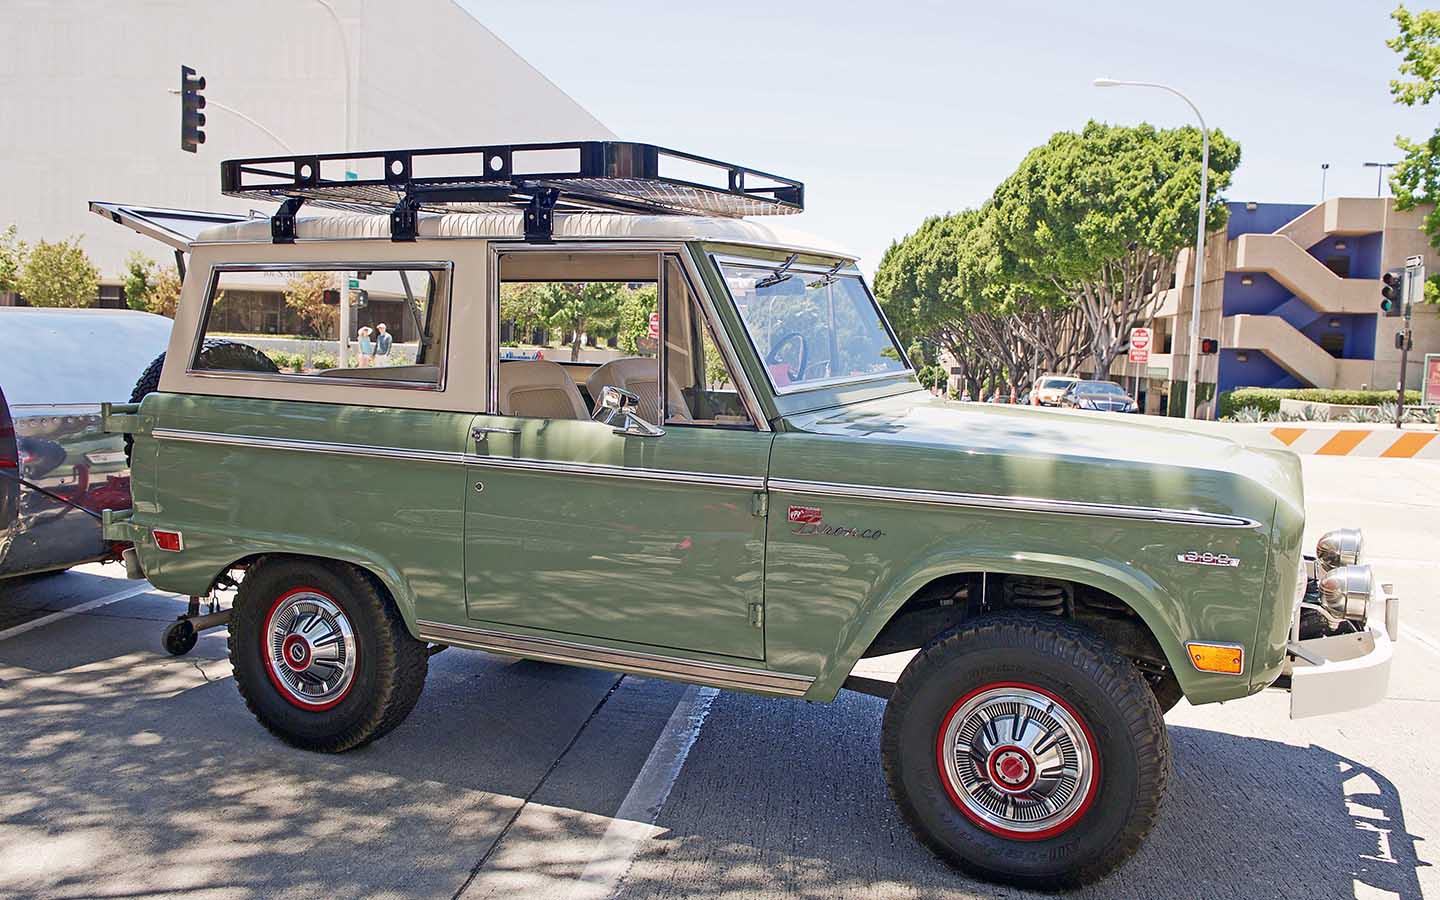 According to Ford Bronco history and facts, the suv was launched in the 60’s